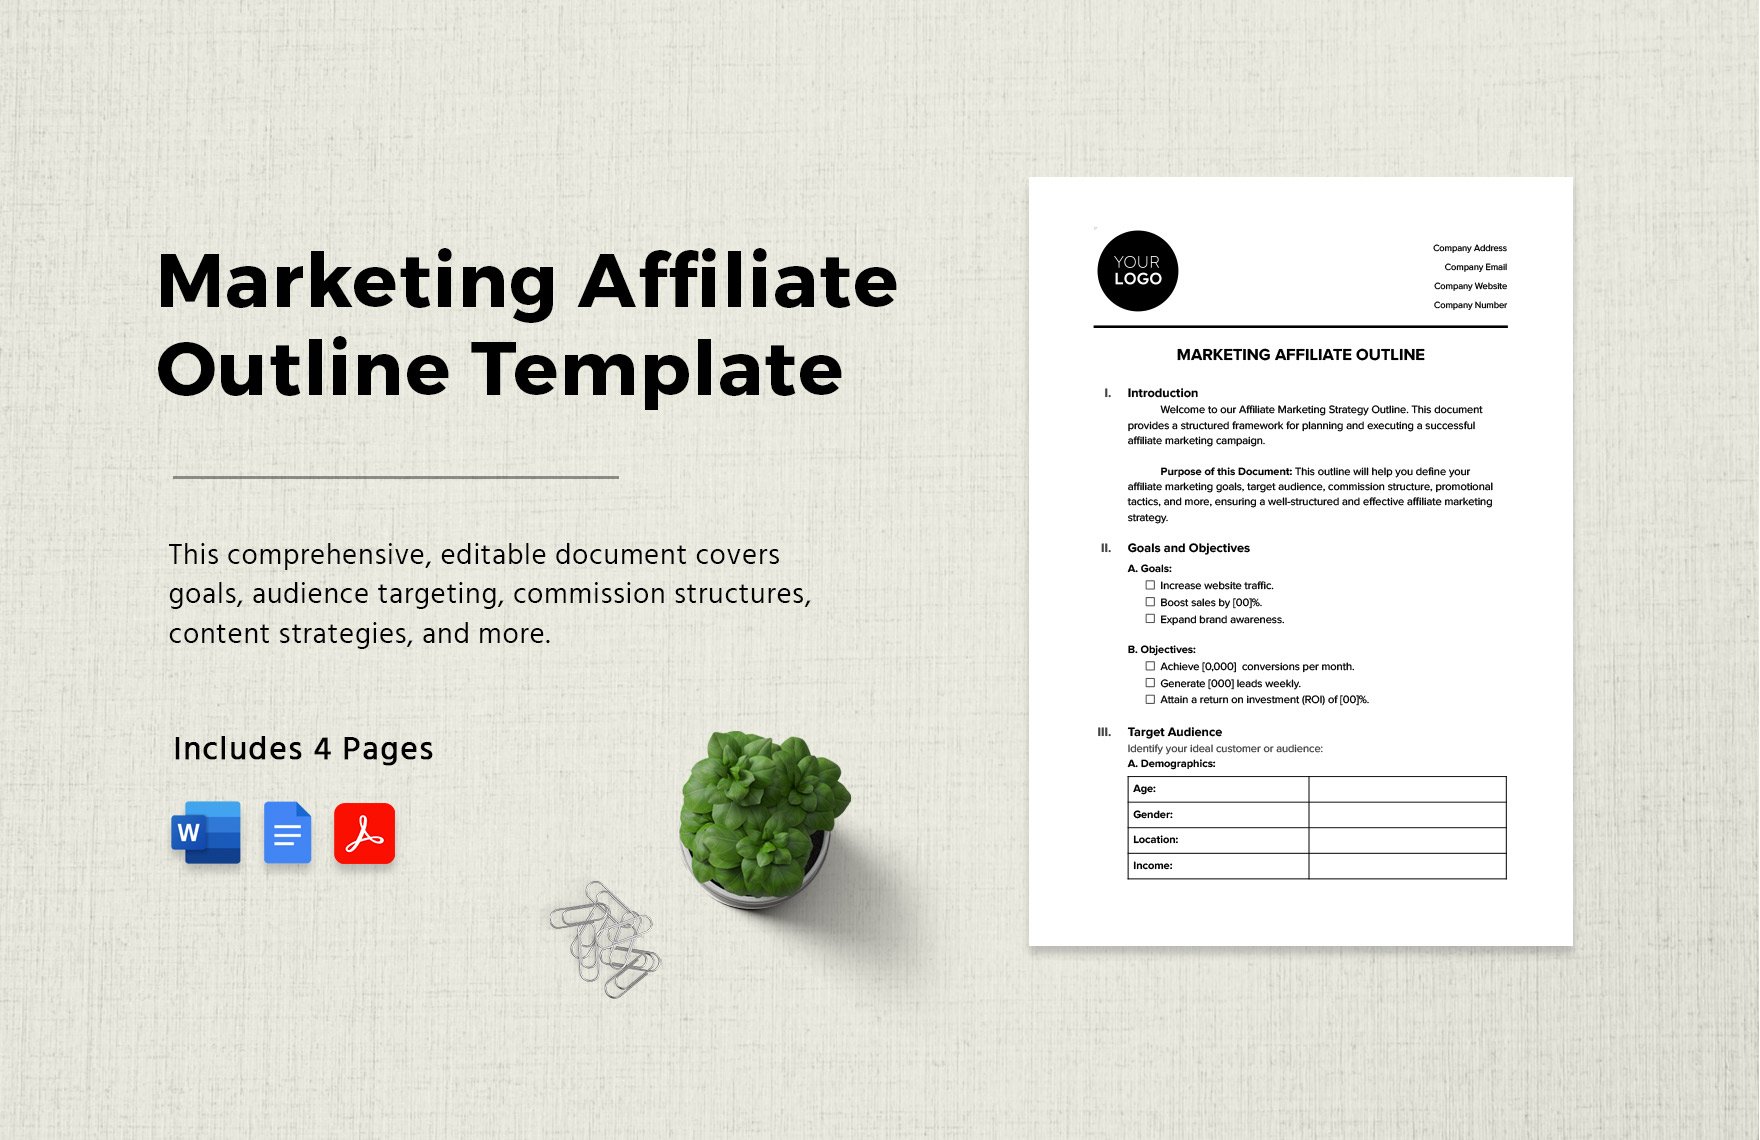 Marketing Affiliate Outline Template in Word, Google Docs, PDF